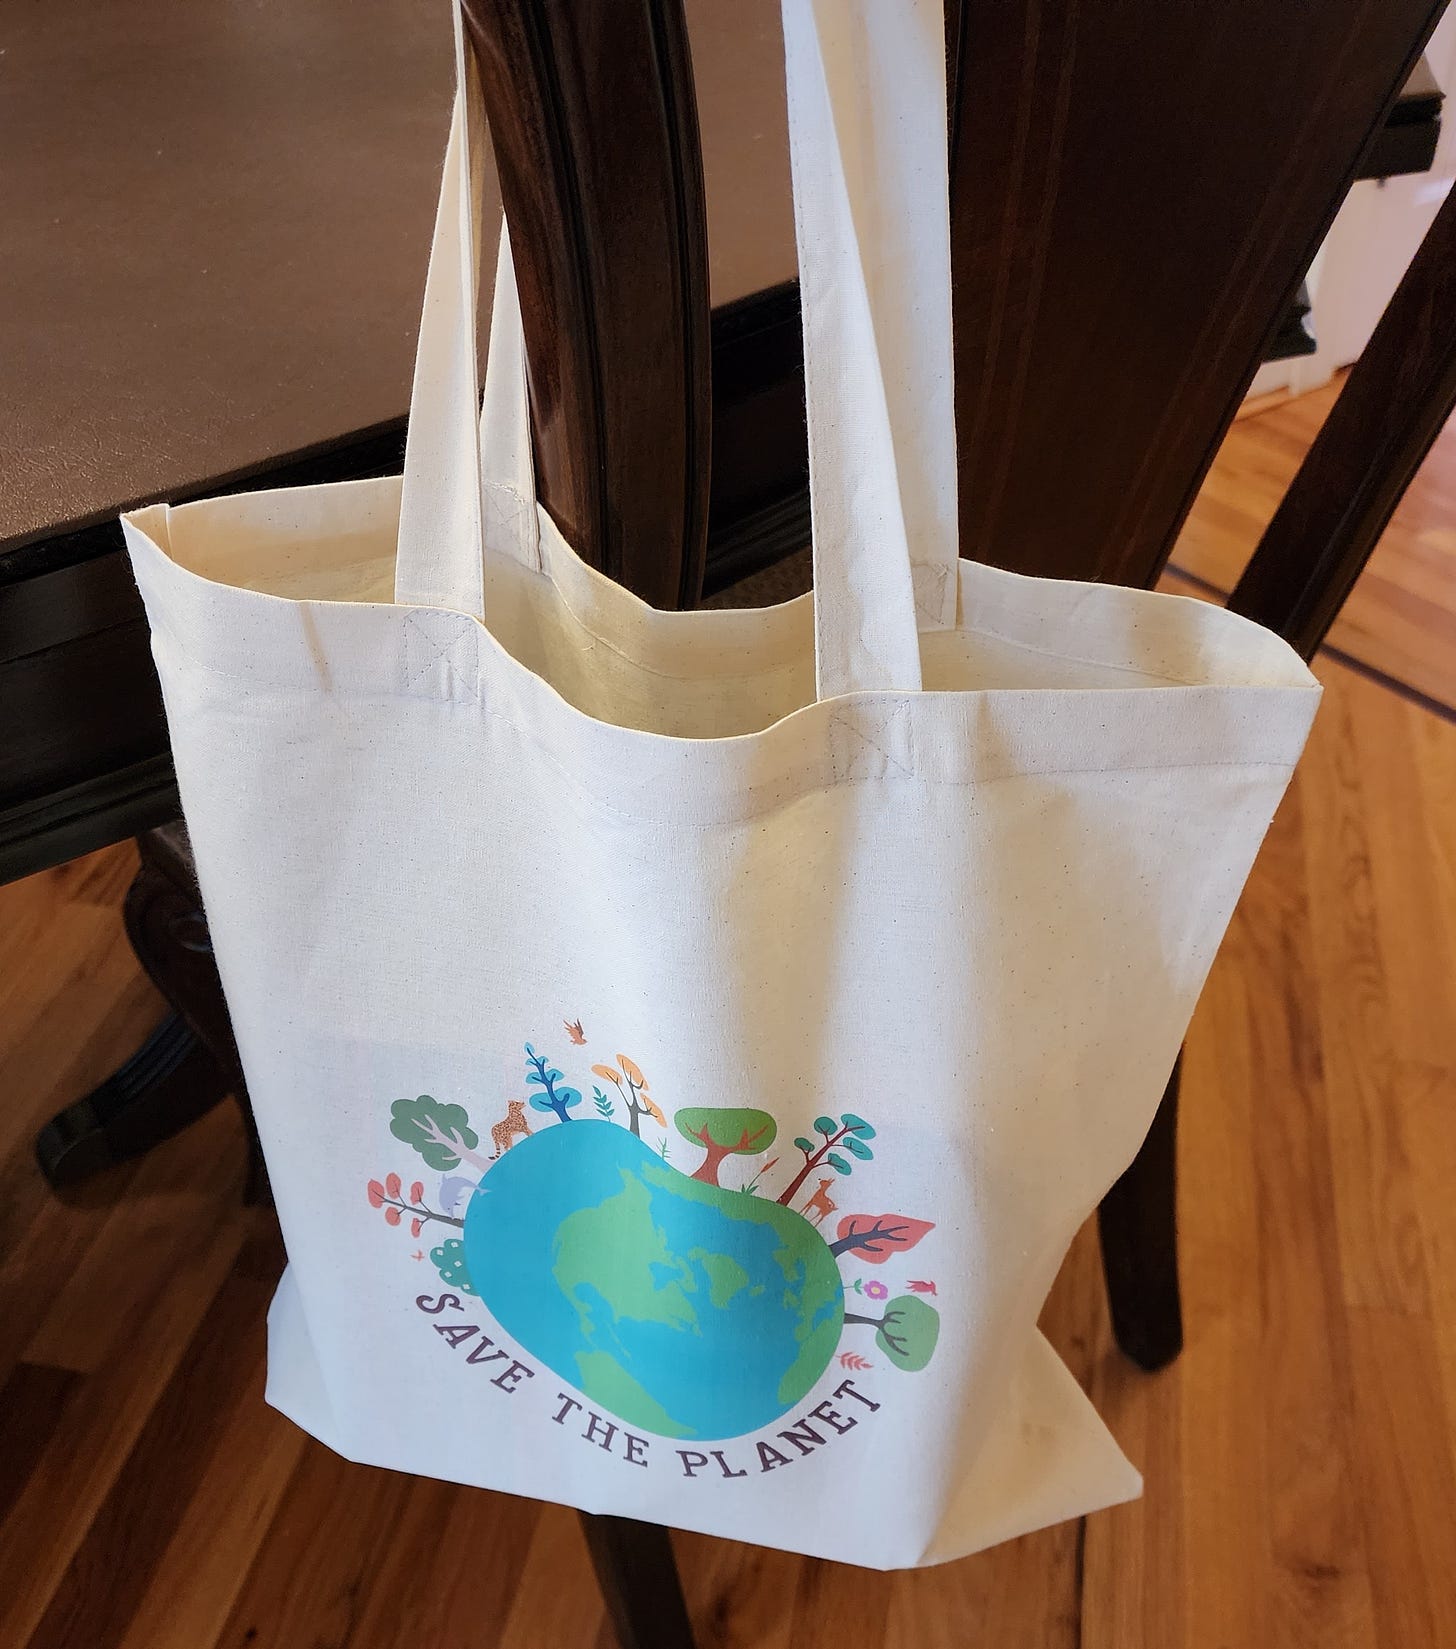 Save The Planet tote bag hanging on chair